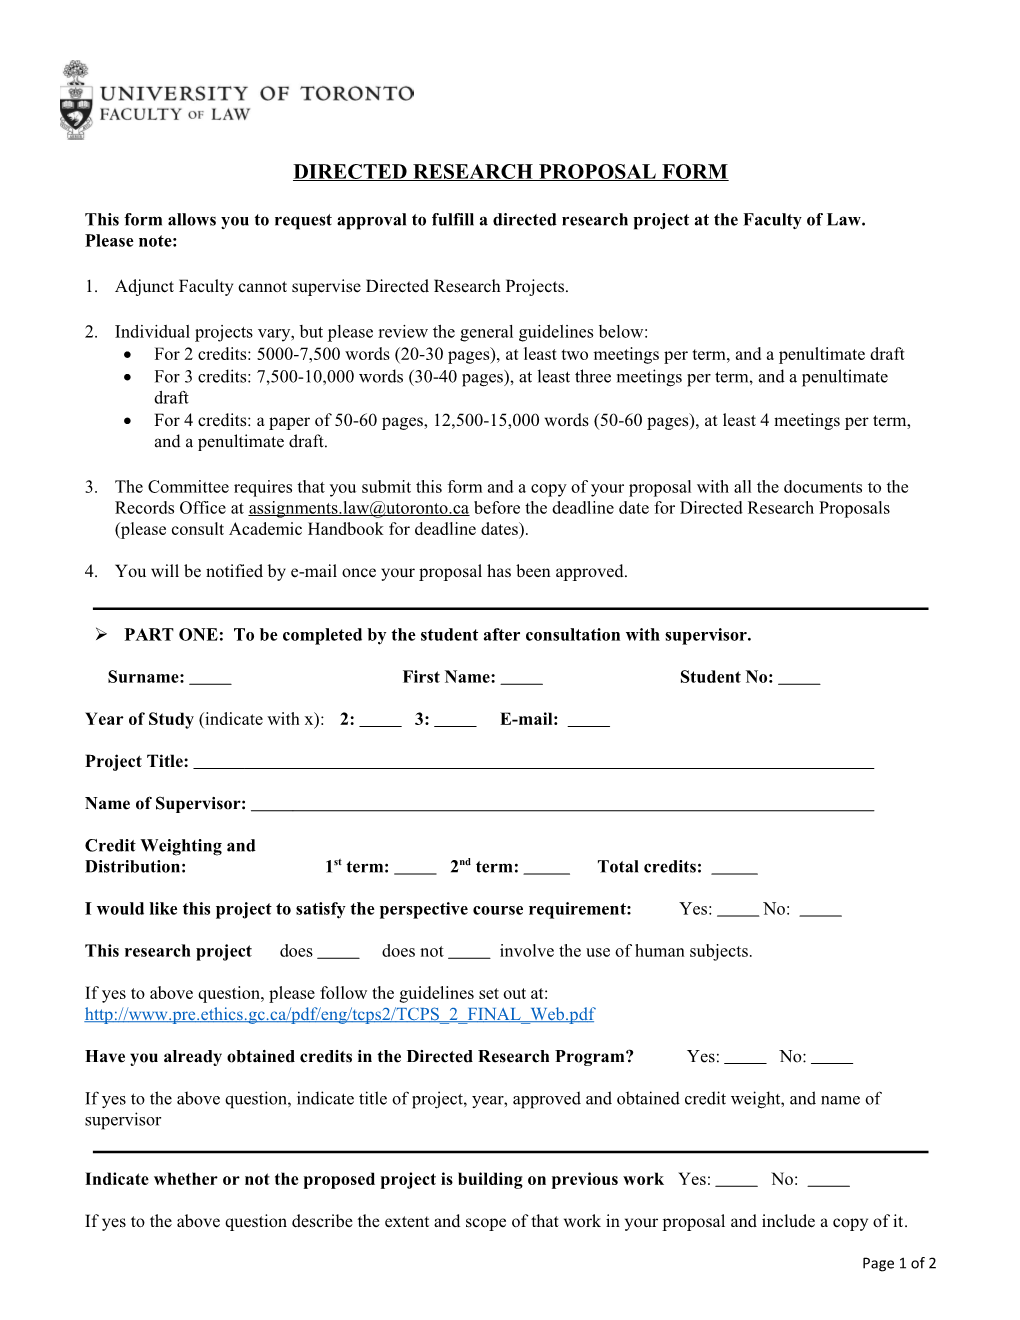 Directed Research Proposal Form